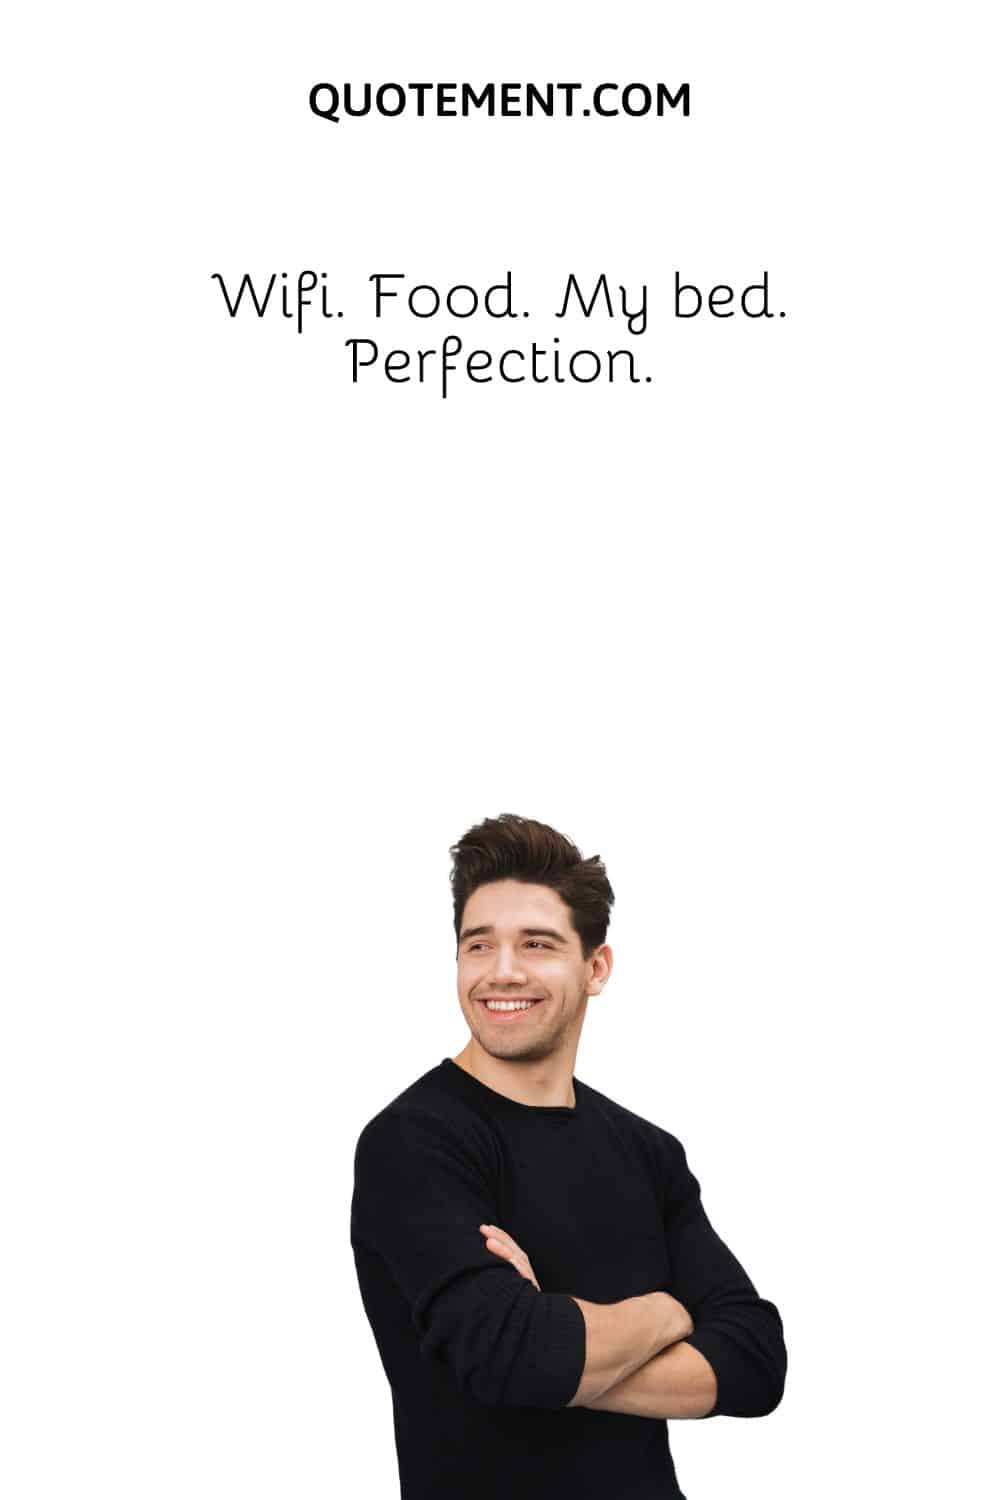 Wifi. Food. My bed. Perfection